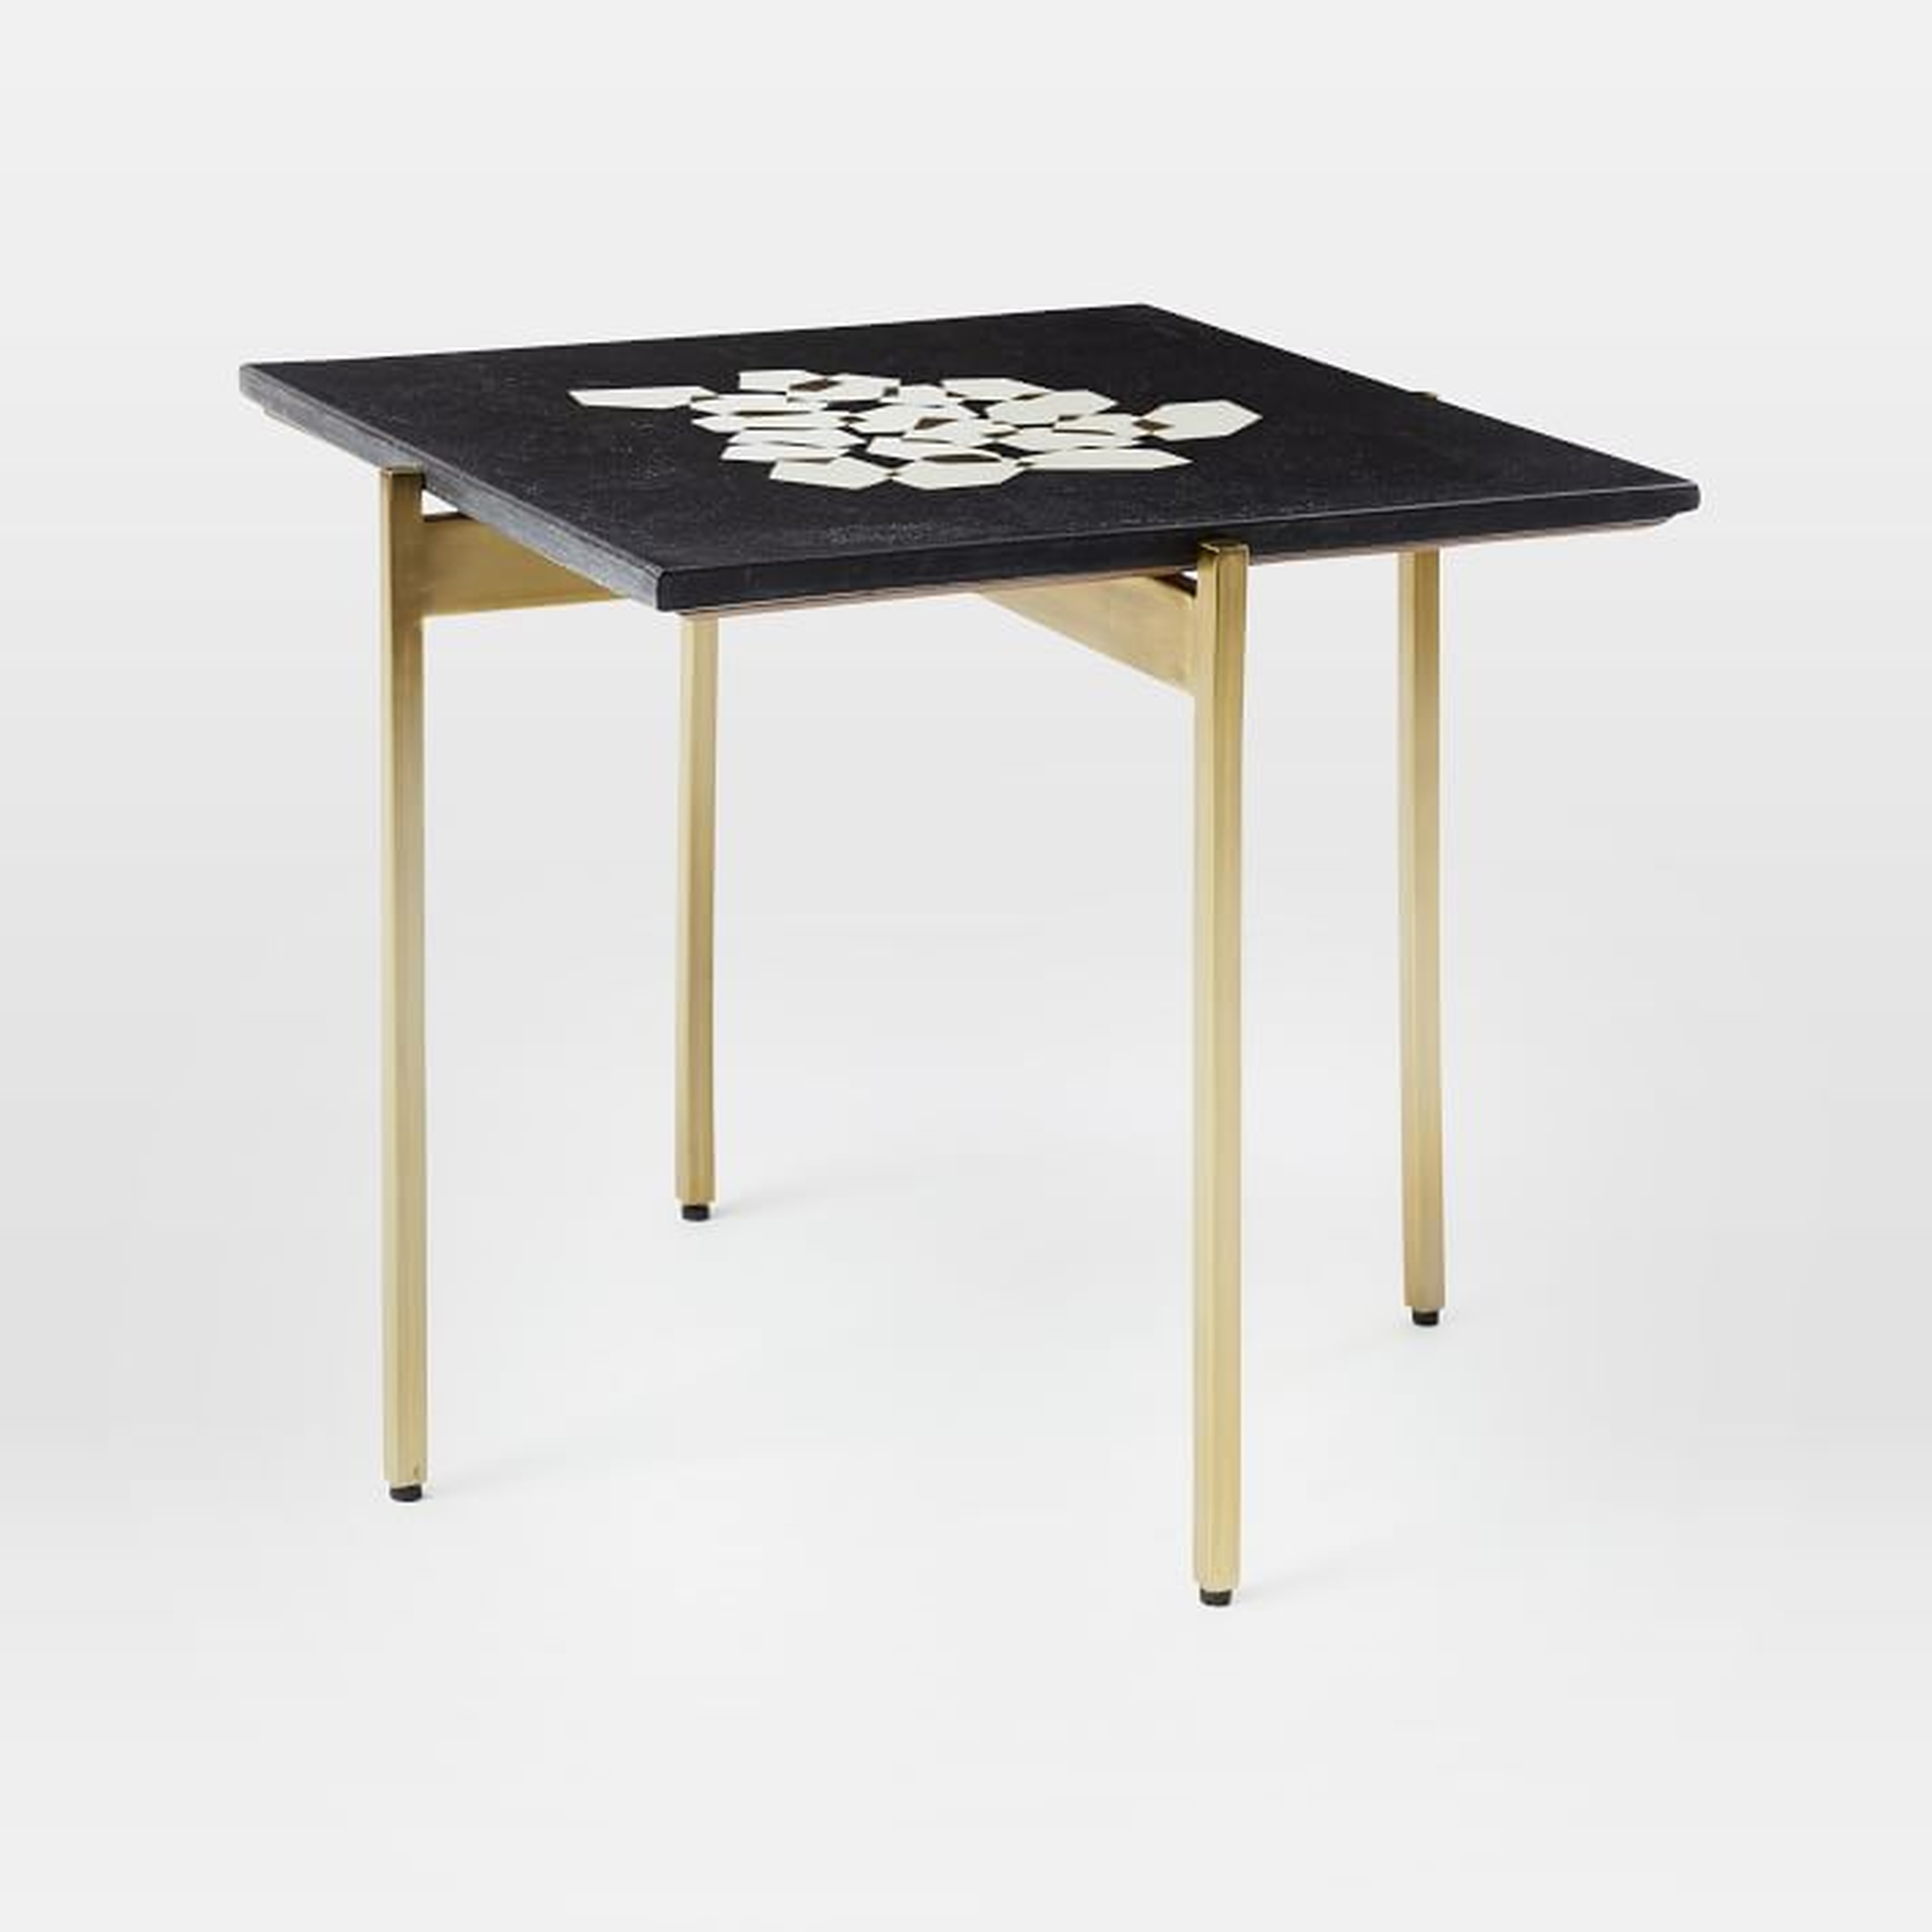 Graphic Marble Inlay Side Table - Hexagons - West Elm